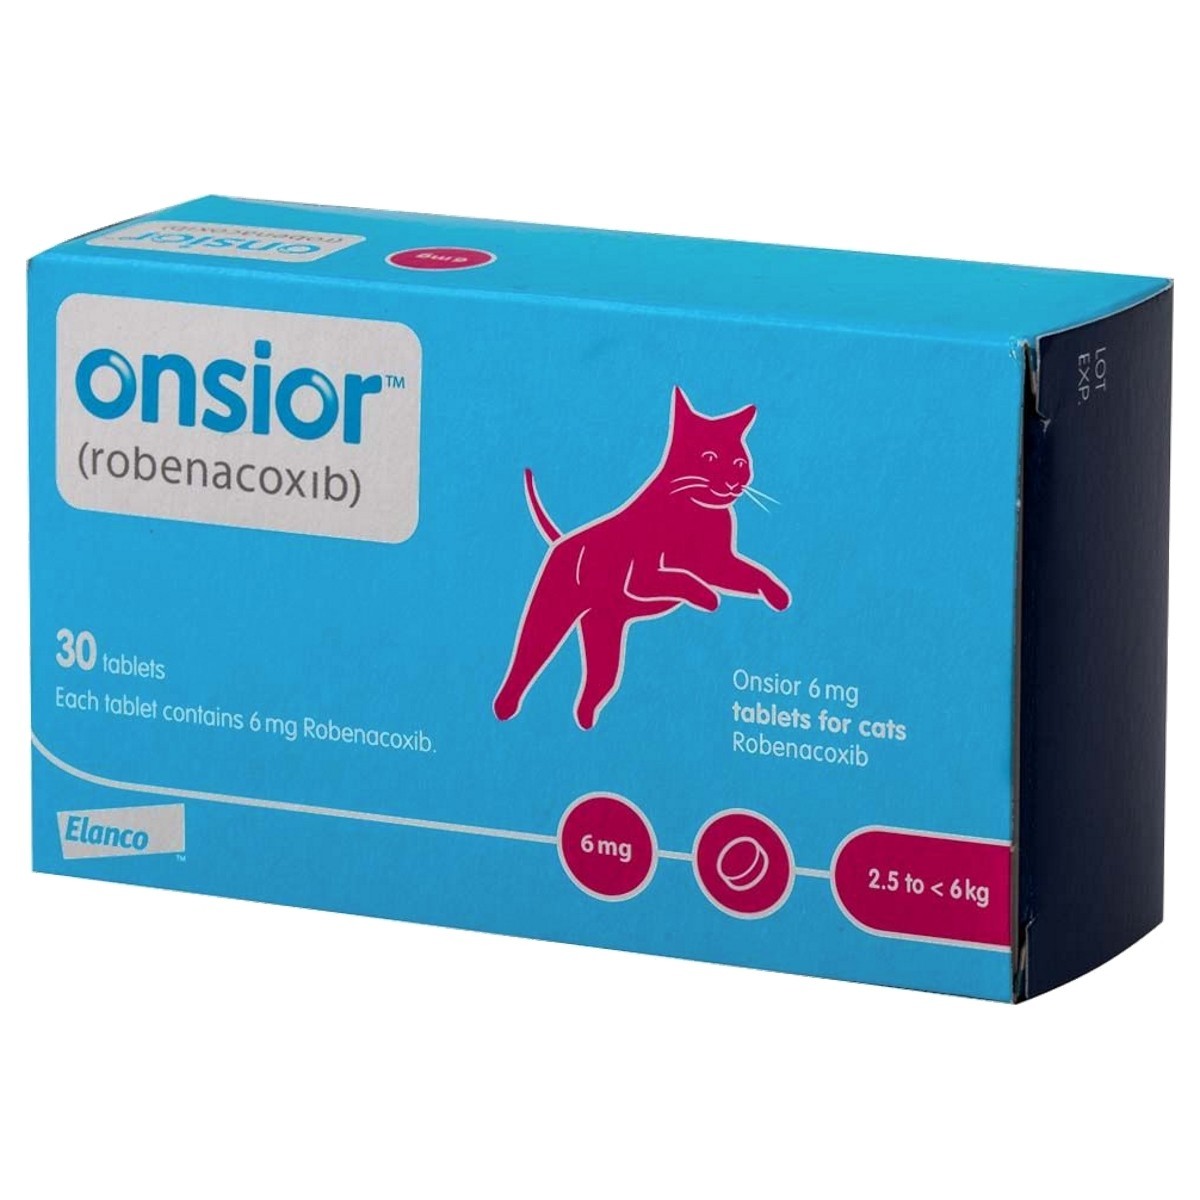 Onsior 6mg Tablets for Cats - From £0.61